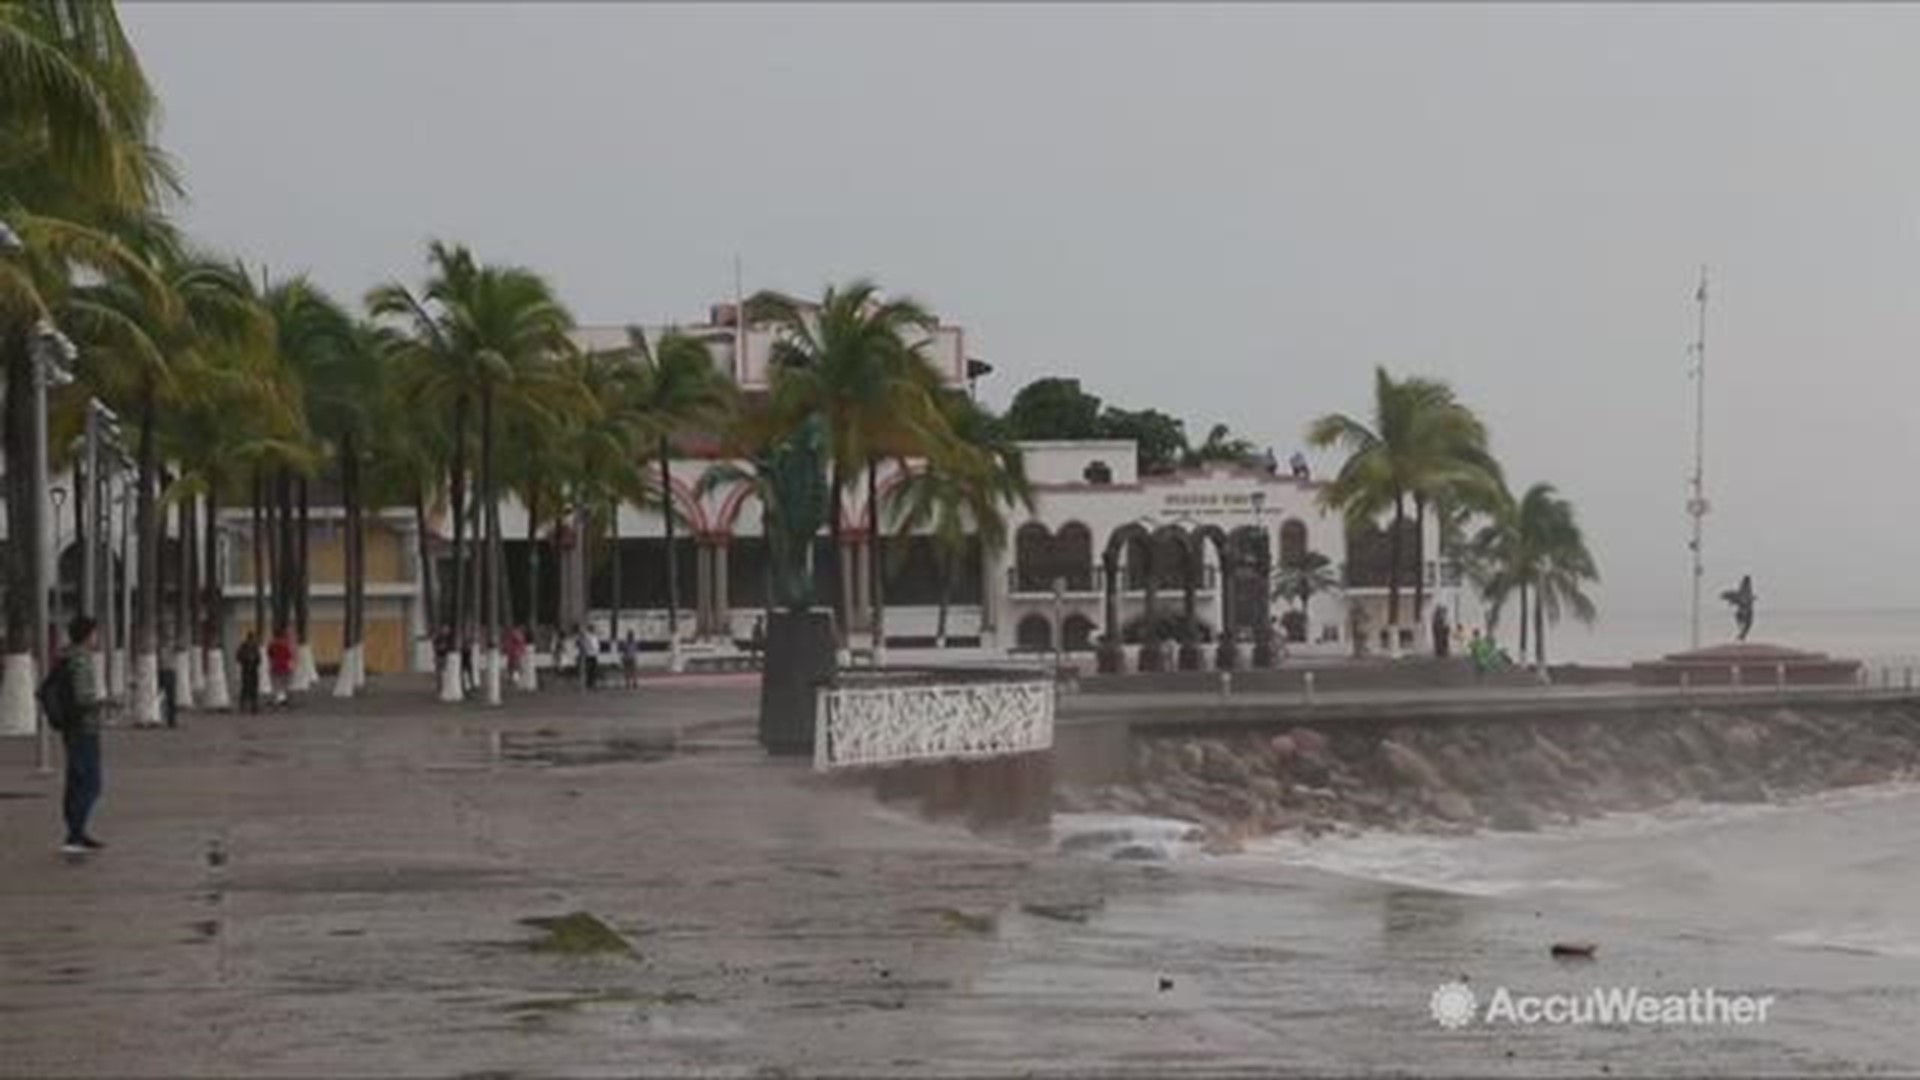 Willa made landfall as a Category 3 near Isla Del Bosque, Sinaloa, Mexico on Tuesday evening bringing with it dangerous storm surge, damaging winds and flooding.